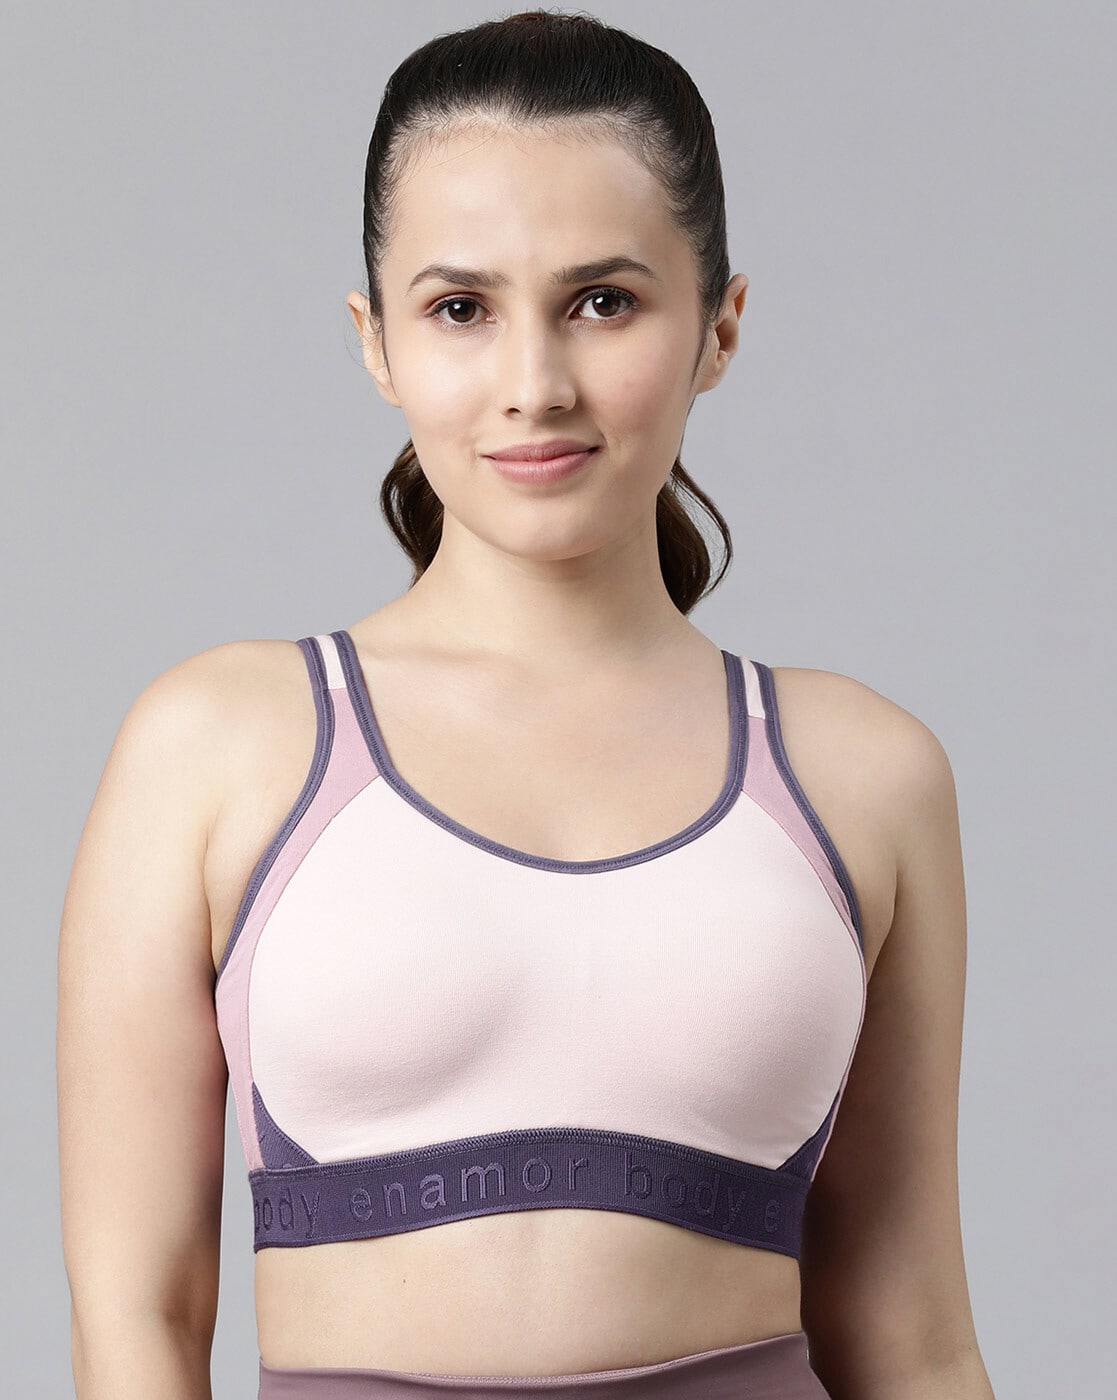 Lightning Deals Of Today Prime Clearance Women's Sports Bras Plus